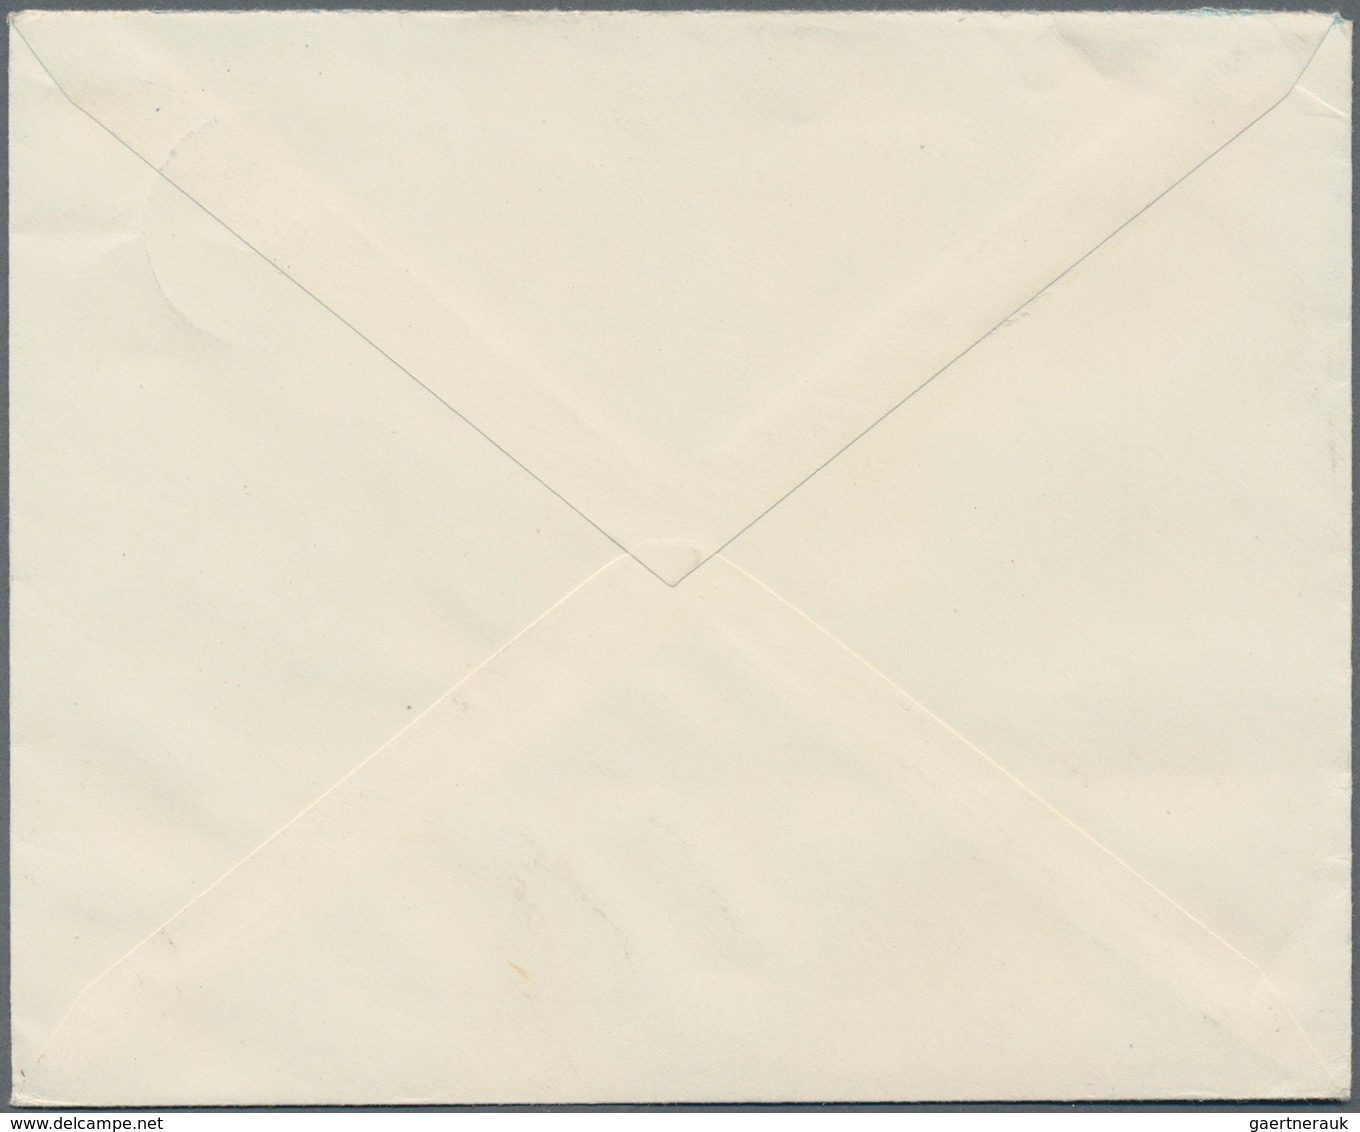 Curacao: 1929, Two Stationery Envelopes: 12½ C Brown Uprated 1 C And 1½ C And 15 C Deep-blue Both Se - Niederländische Antillen, Curaçao, Aruba